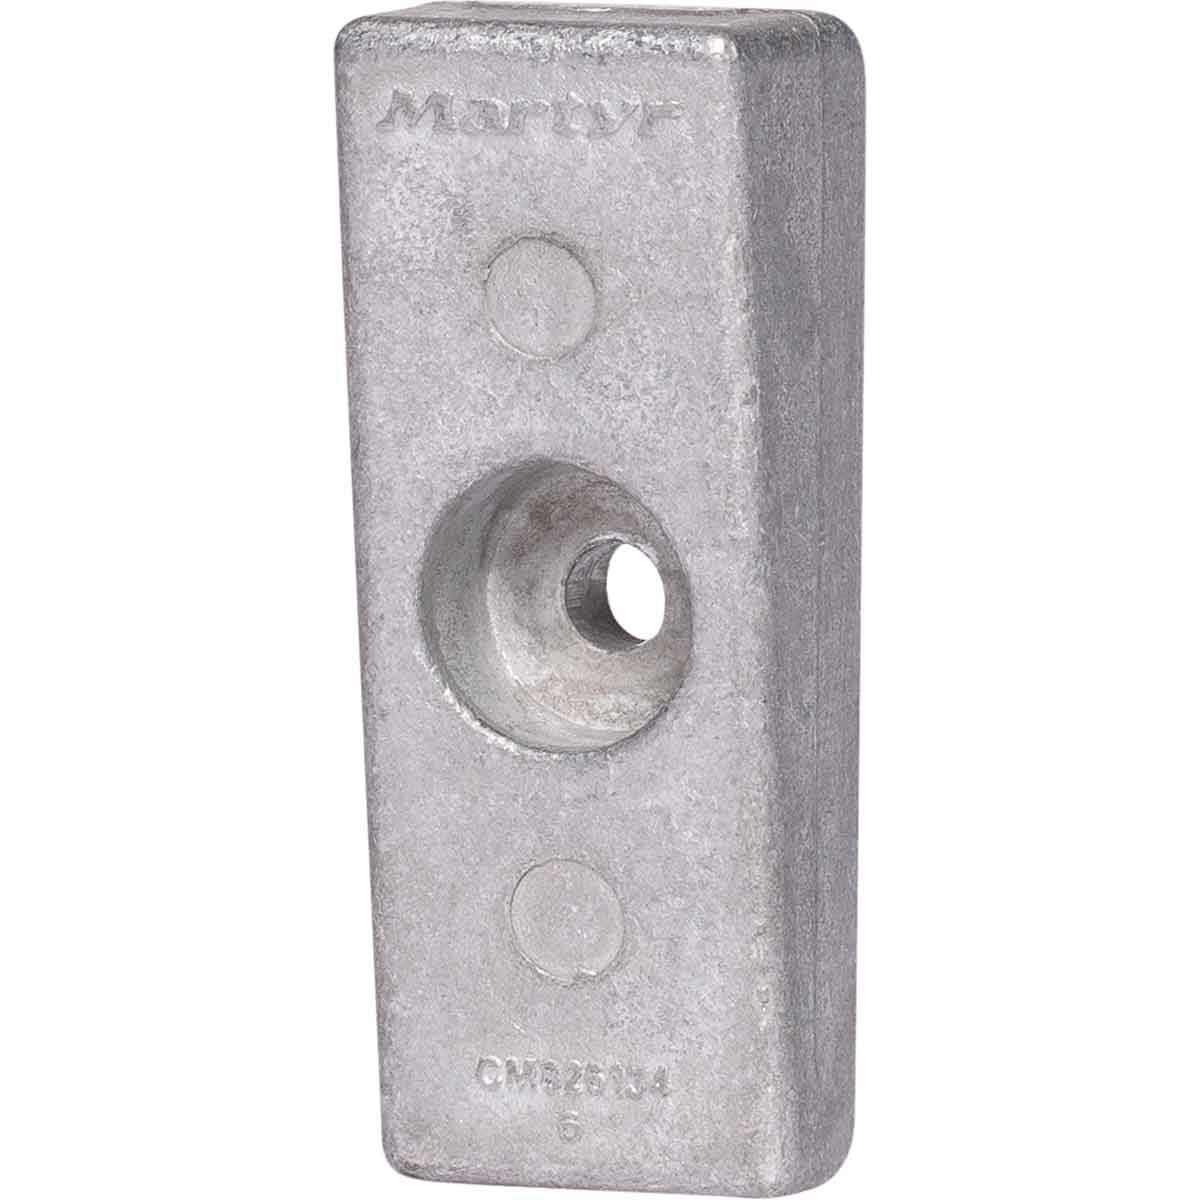 Martyr Alloy Anode - Wedge Block, CM826134A, , scaau_hi-res